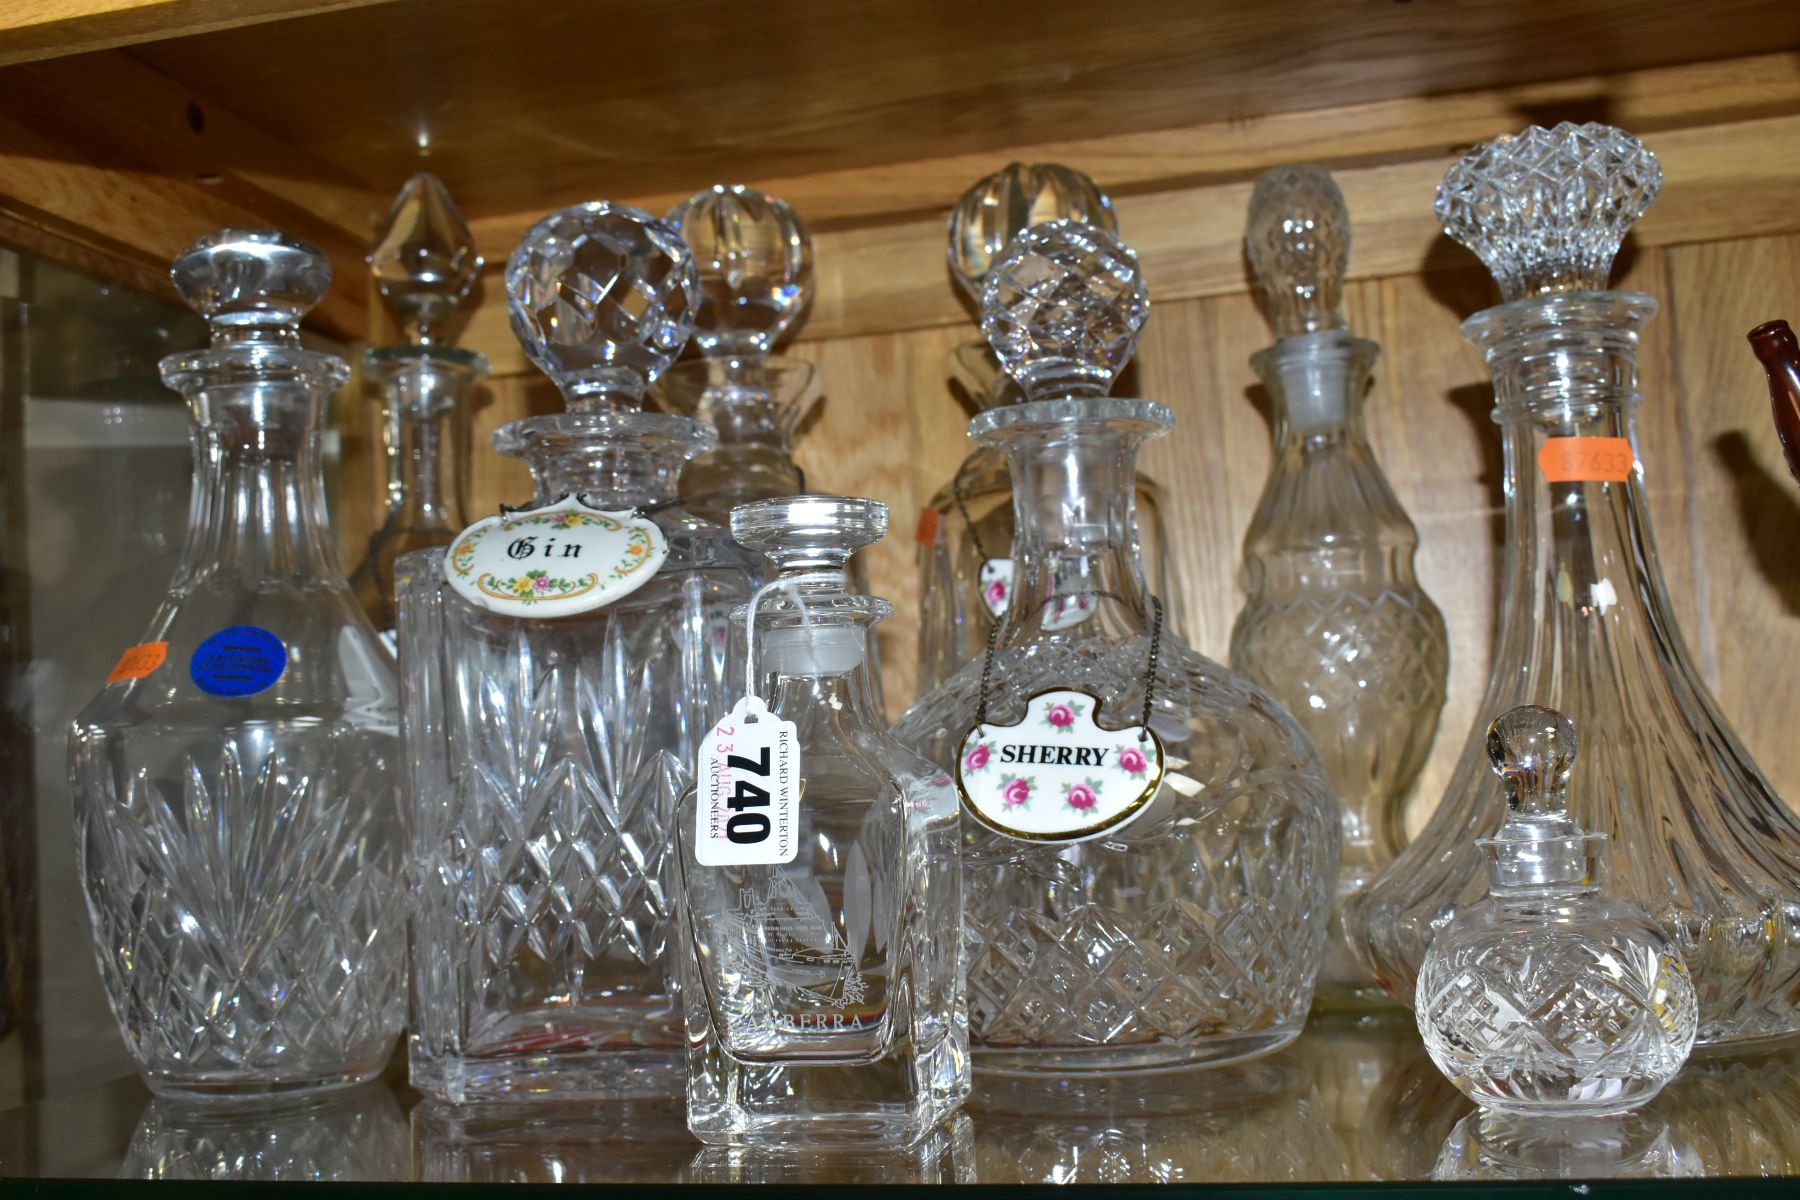 TEN CUT AND PRESSED GLASS DECANTERS AND BOTTLES, five with named porcelain decanter labels, one